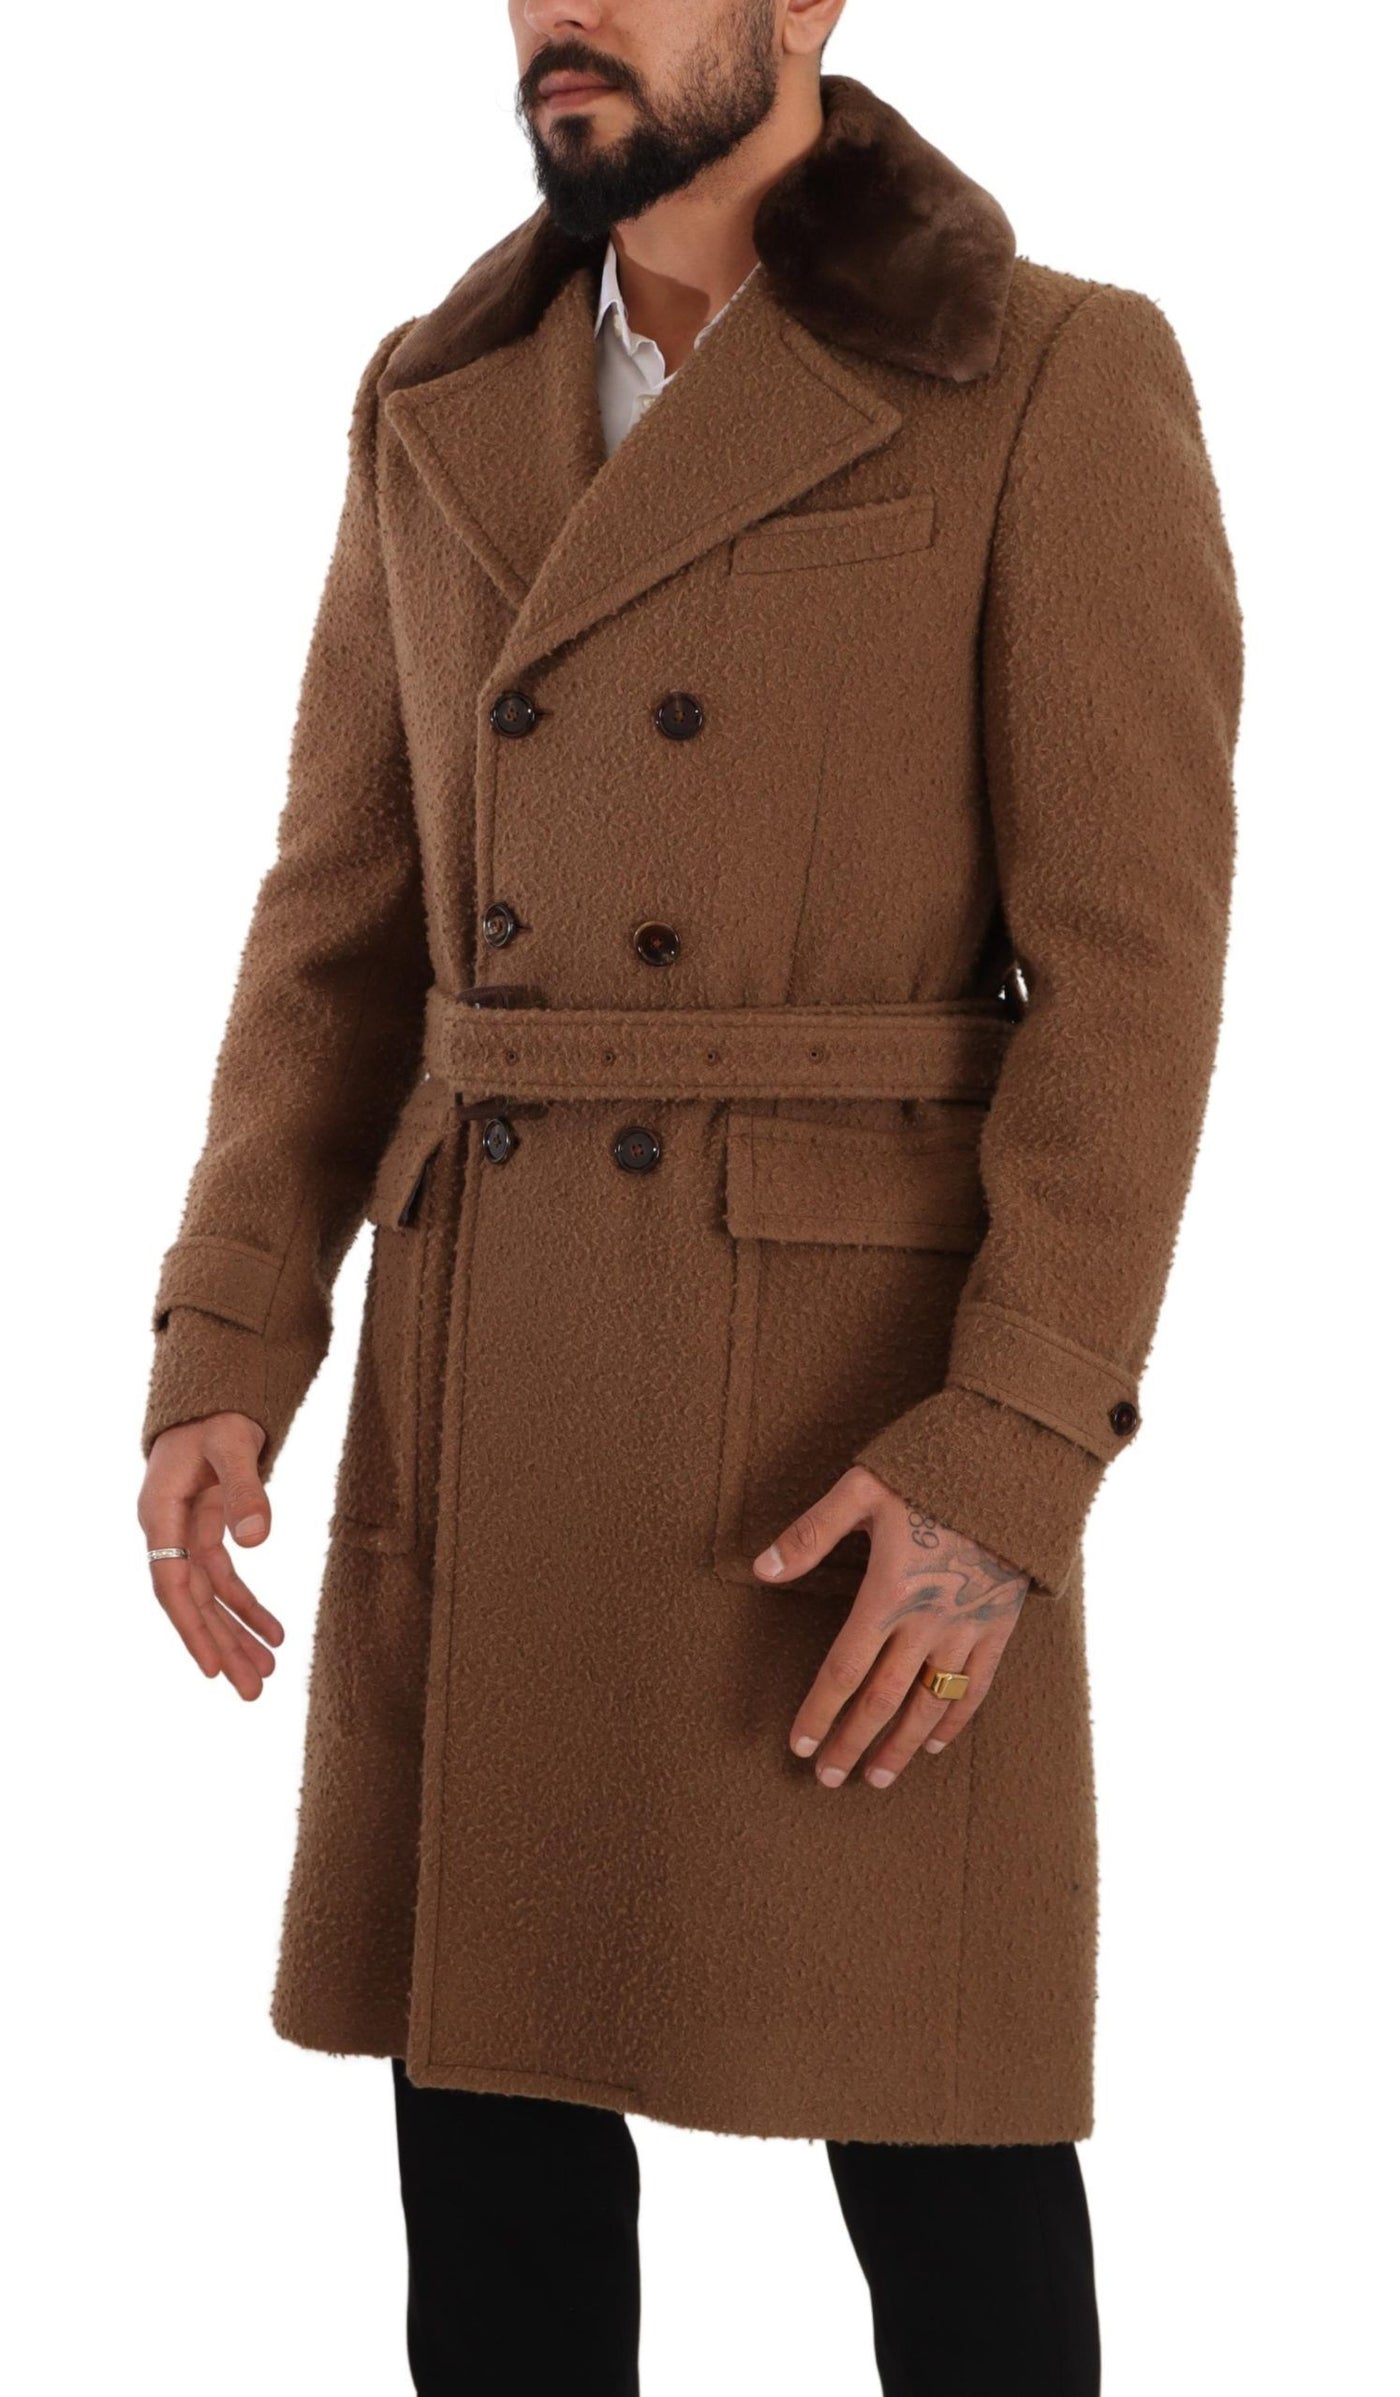 Dolce & Gabbana Brown Wool Long Double Breasted Overcoat Jacket